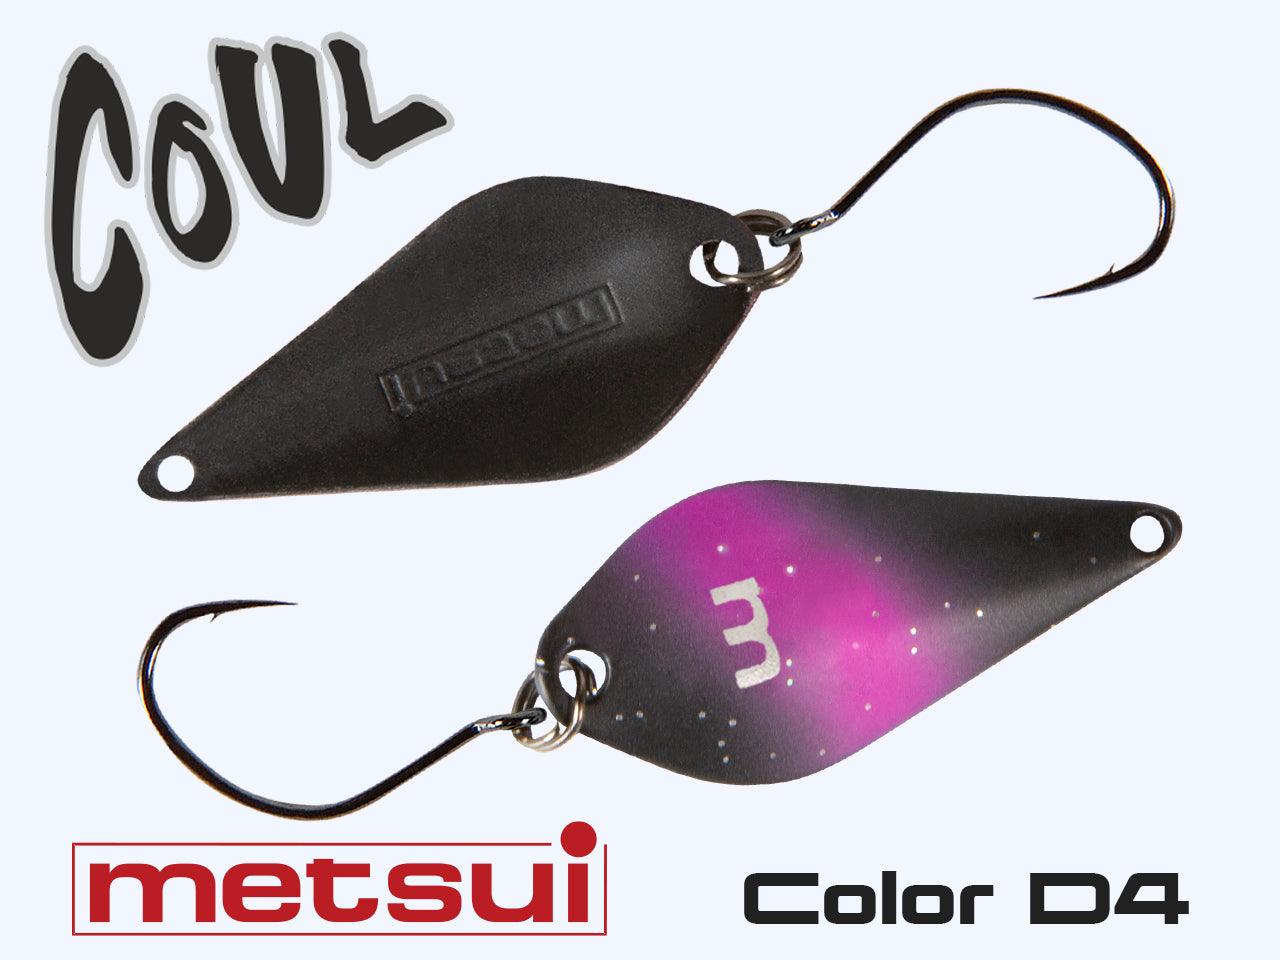 Zemex Mestsui COUL 3.1 g - SP-Fishing